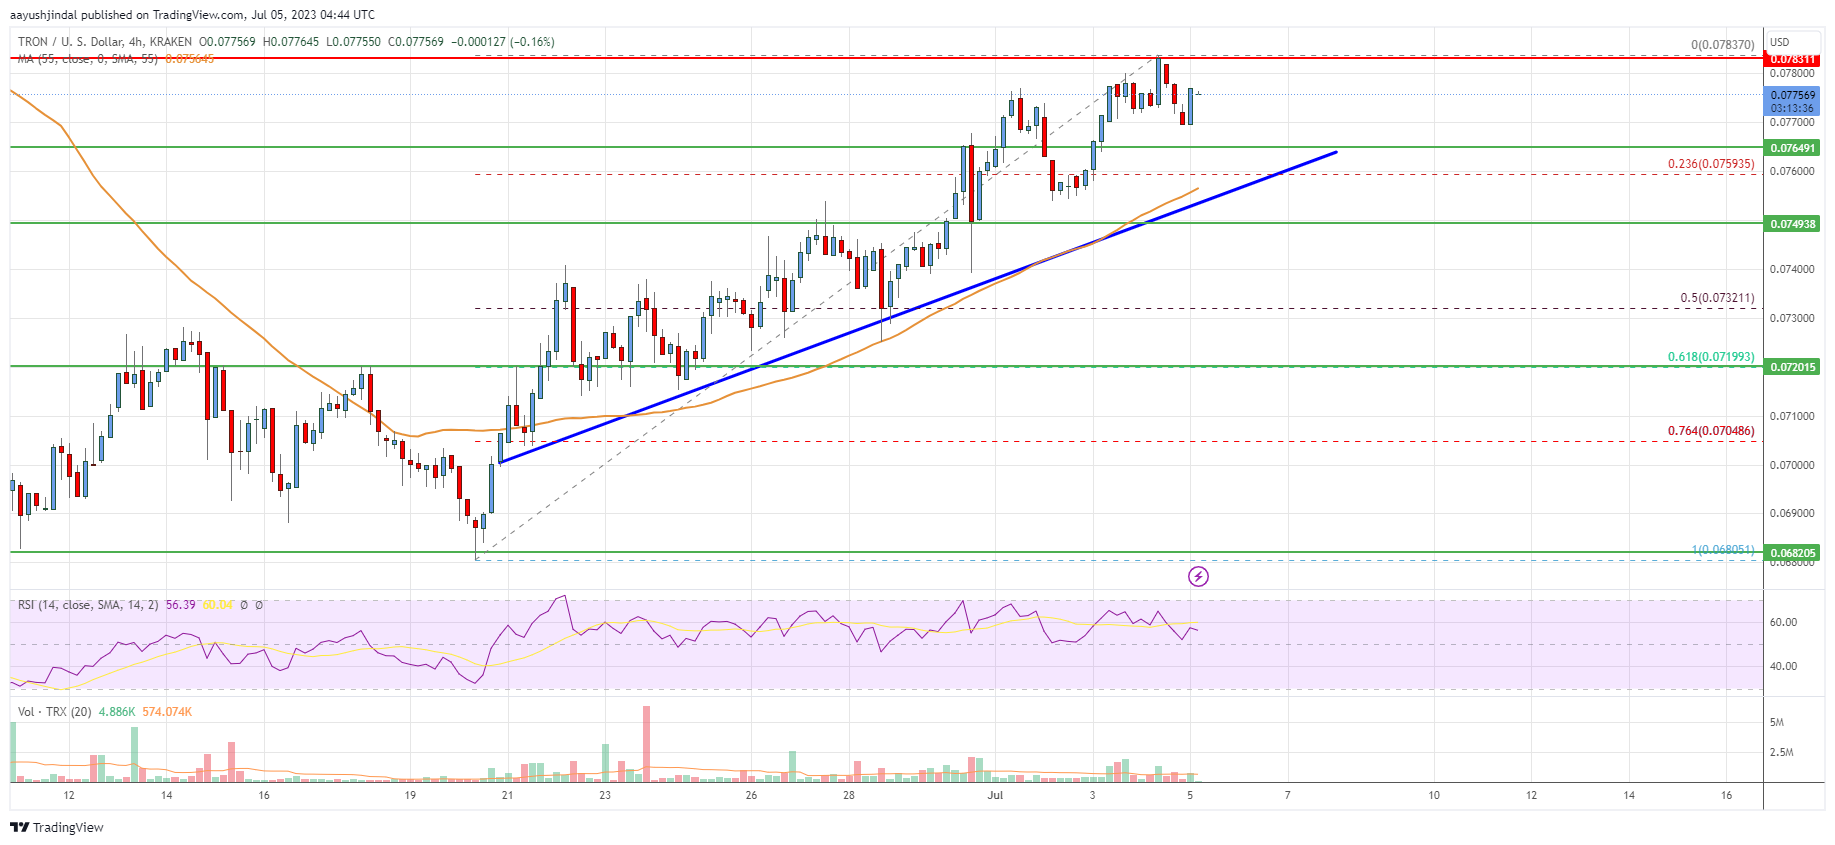 Tron (TRX) Price Analysis: More Gains Possible Above $0.08